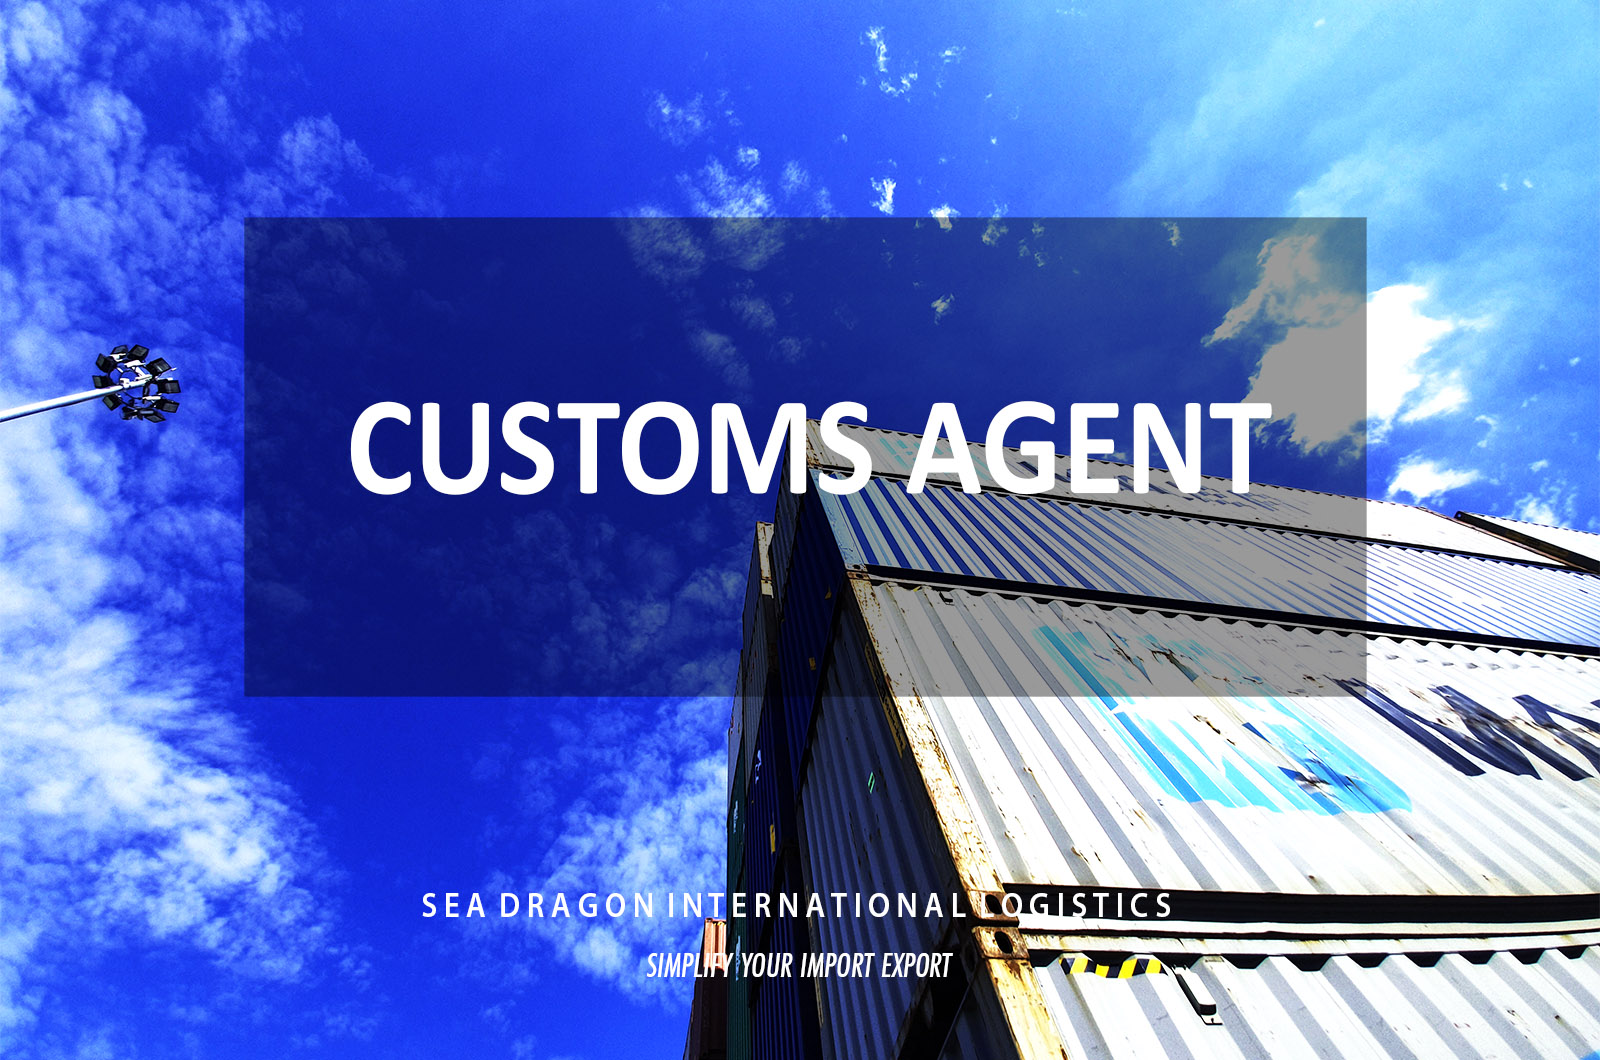 What is a customs agent? Why need customs agent services in Viet Nam?